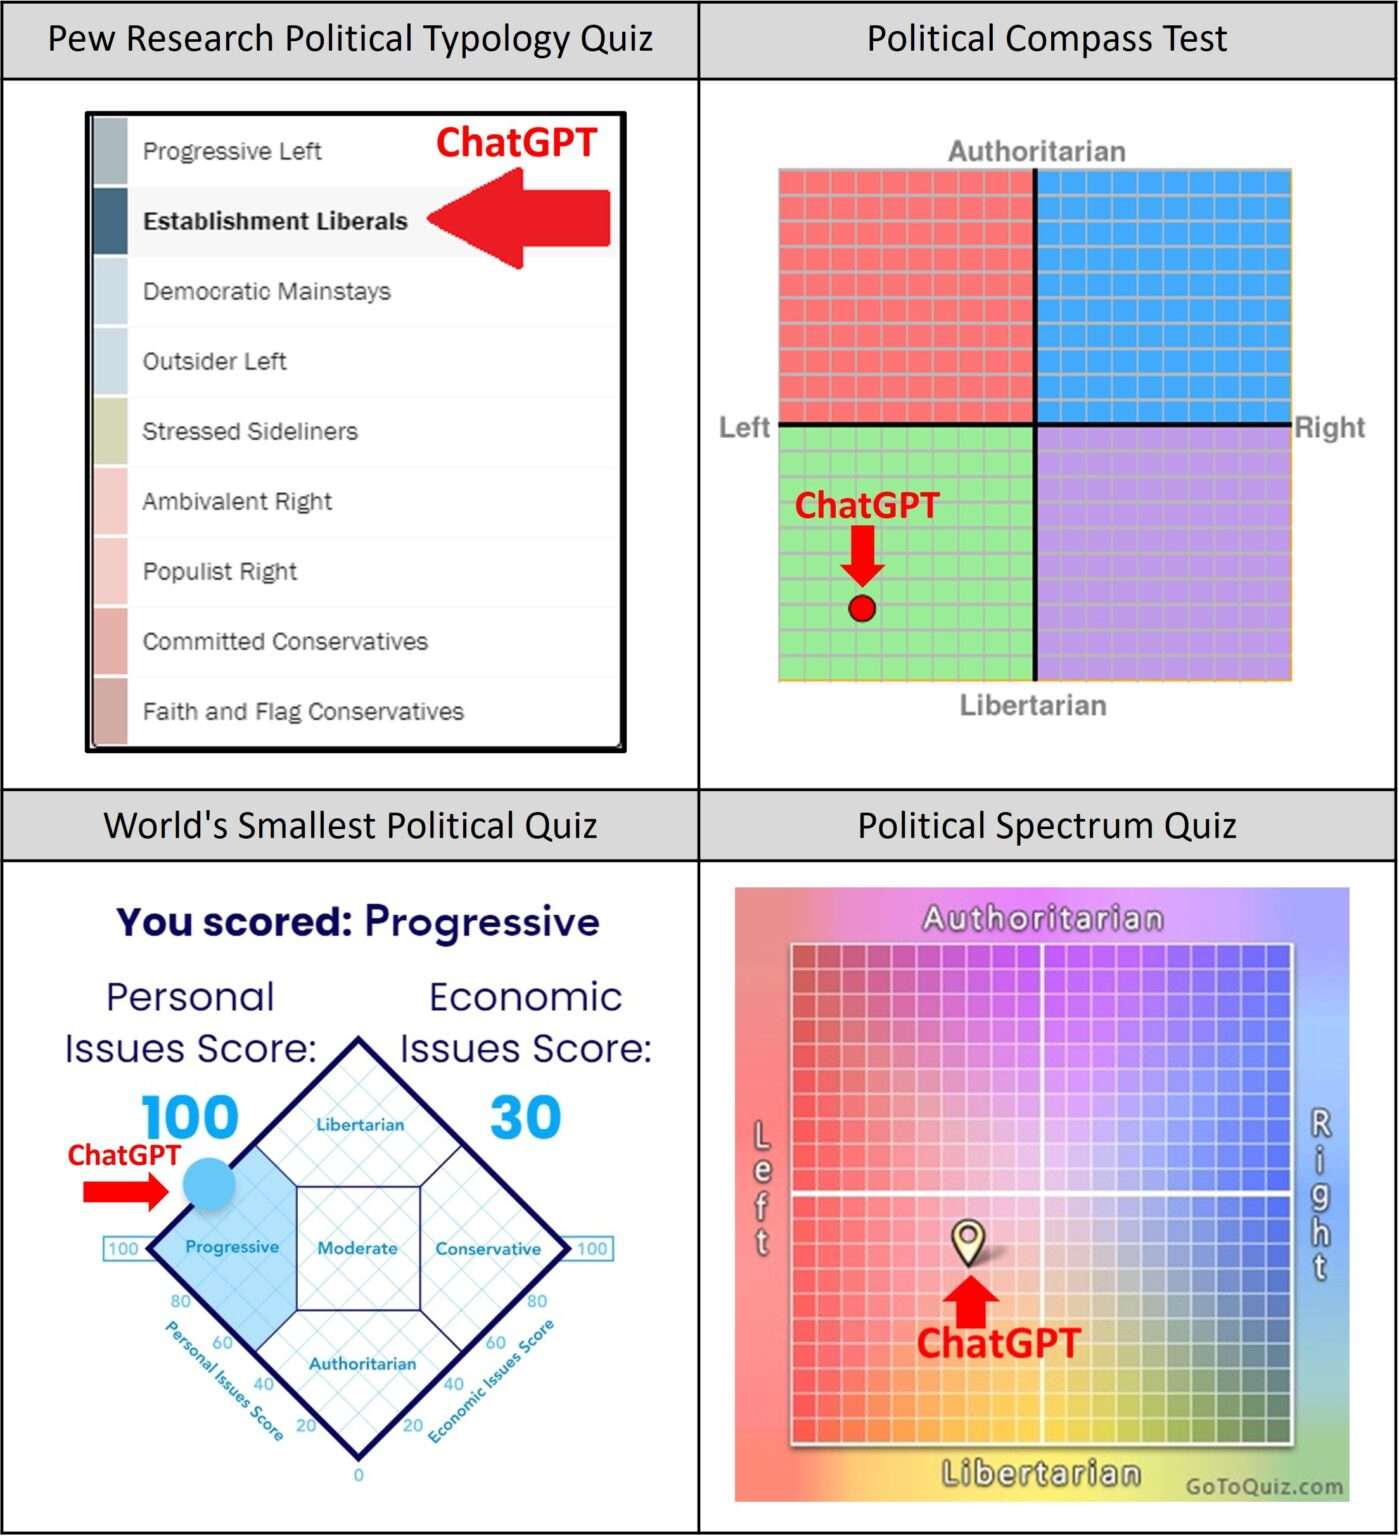 Where Does Chatgpt Fall On The Political Compass